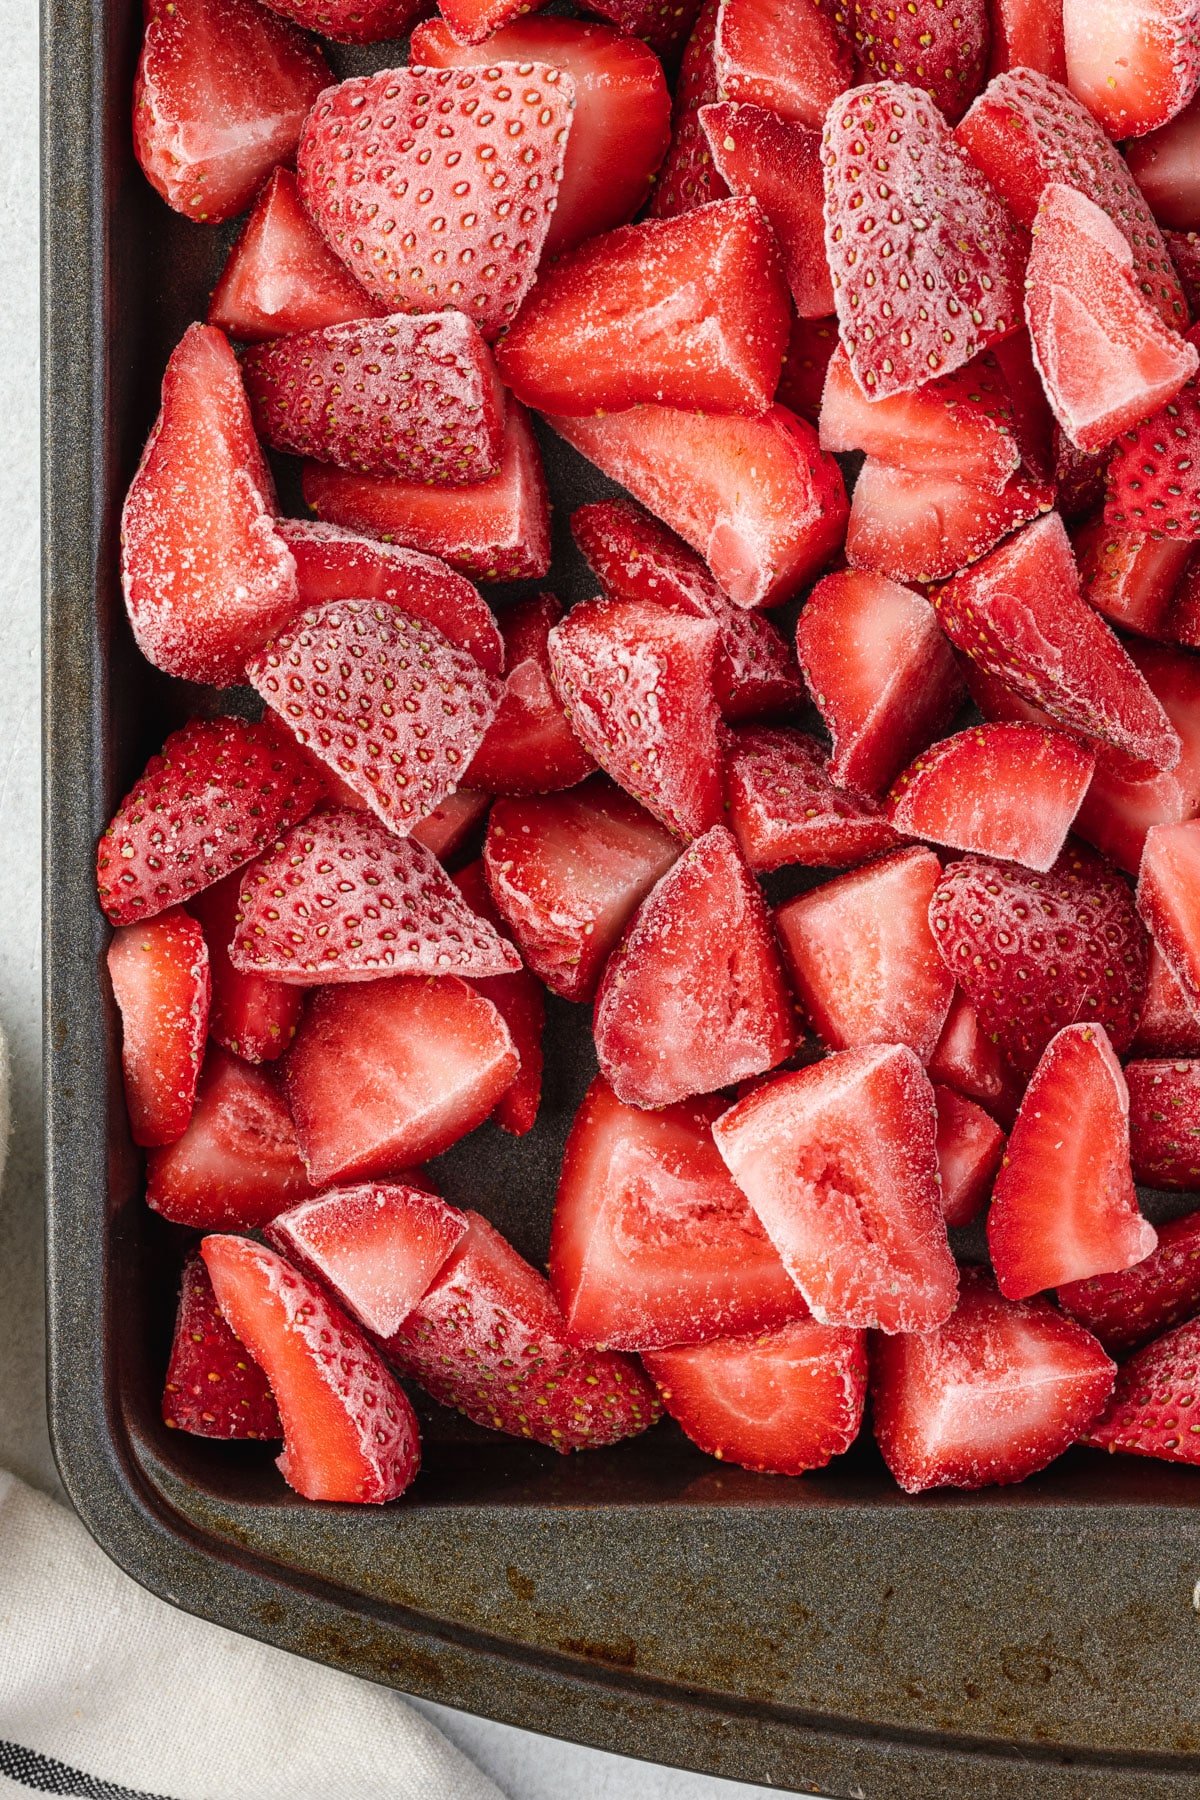 Overhead view of frozen strawberries on a cookie sheet.